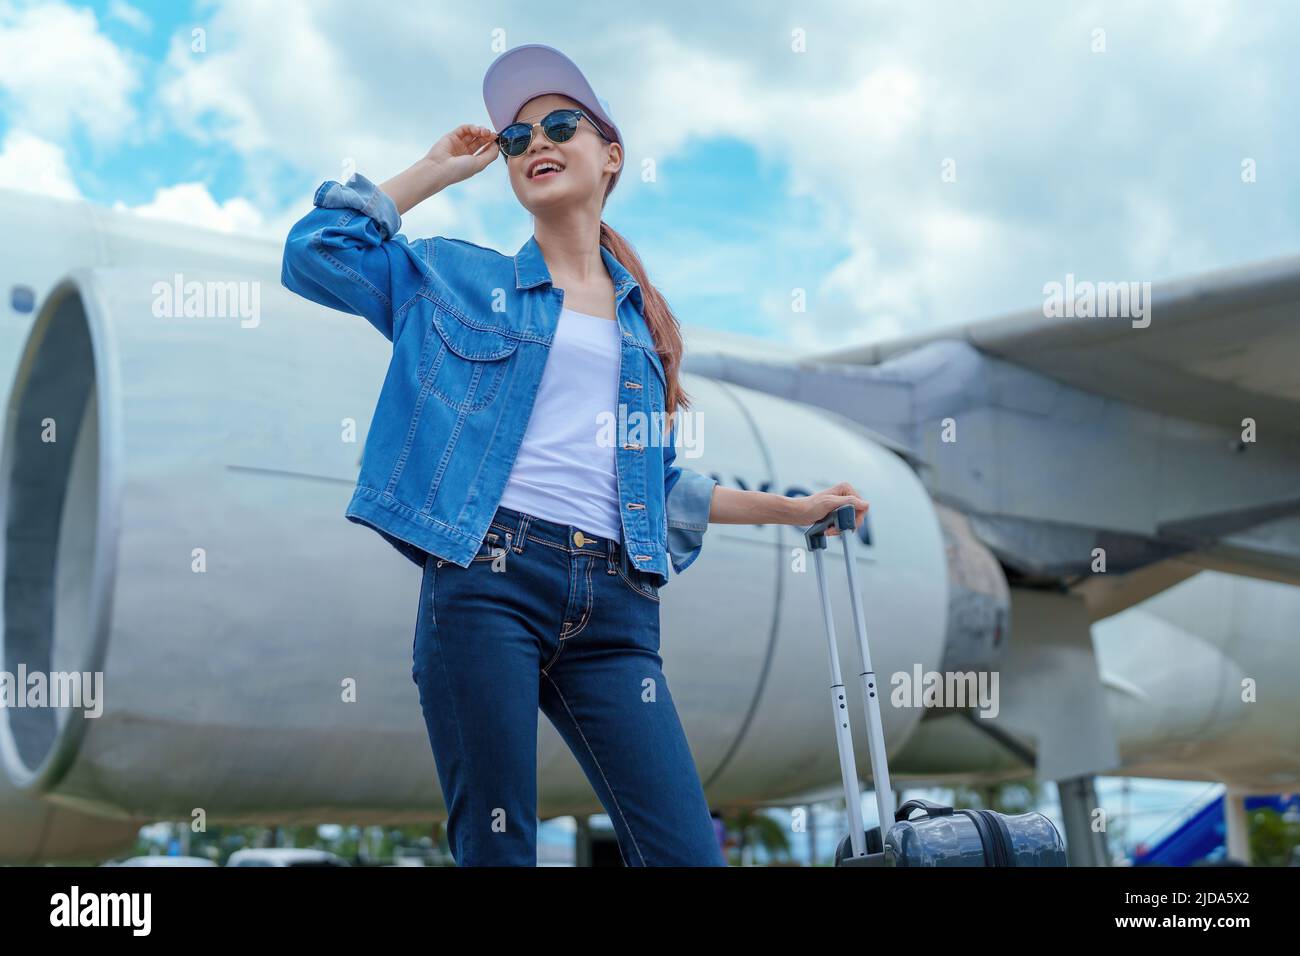 travel business Portrait of an Asian woman showing joy while waiting for a flight Stock Photo